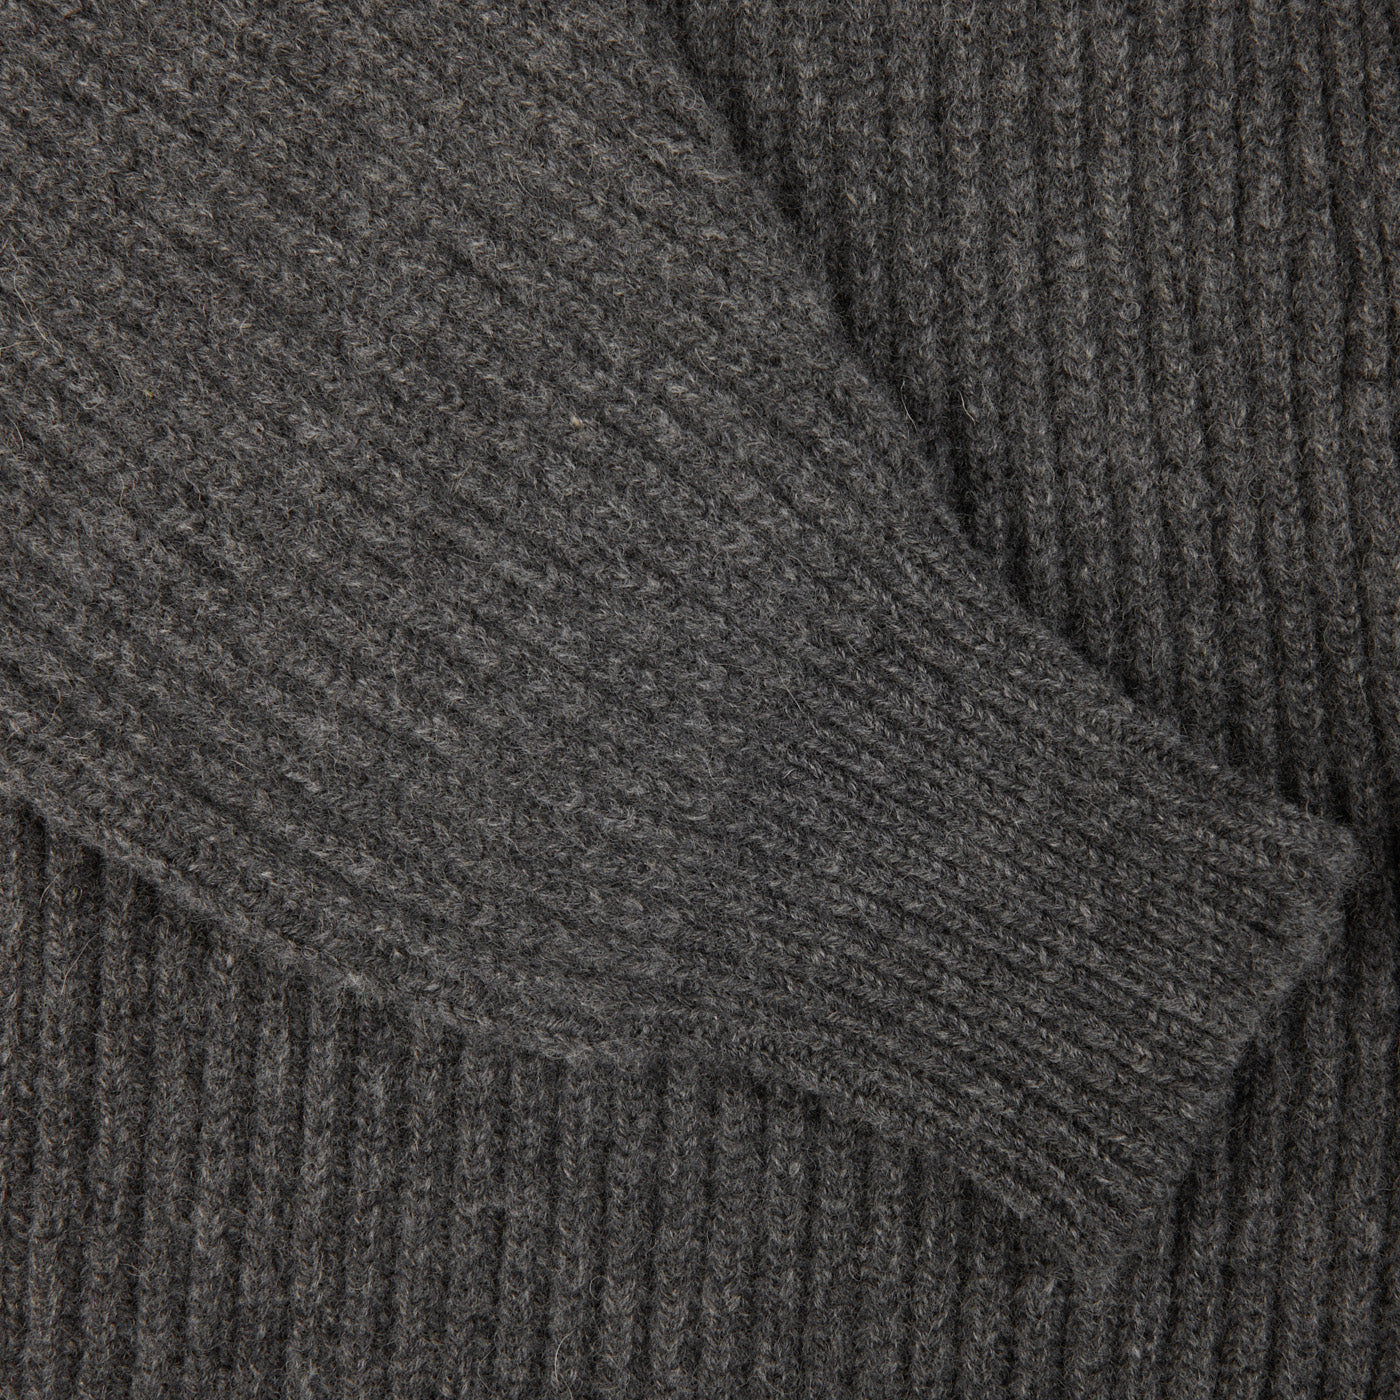 A close up of a Cliff Grey Lambswool Shawl Collar Cardigan made from Scottish lambswool, featuring leather buttons by William Lockie.